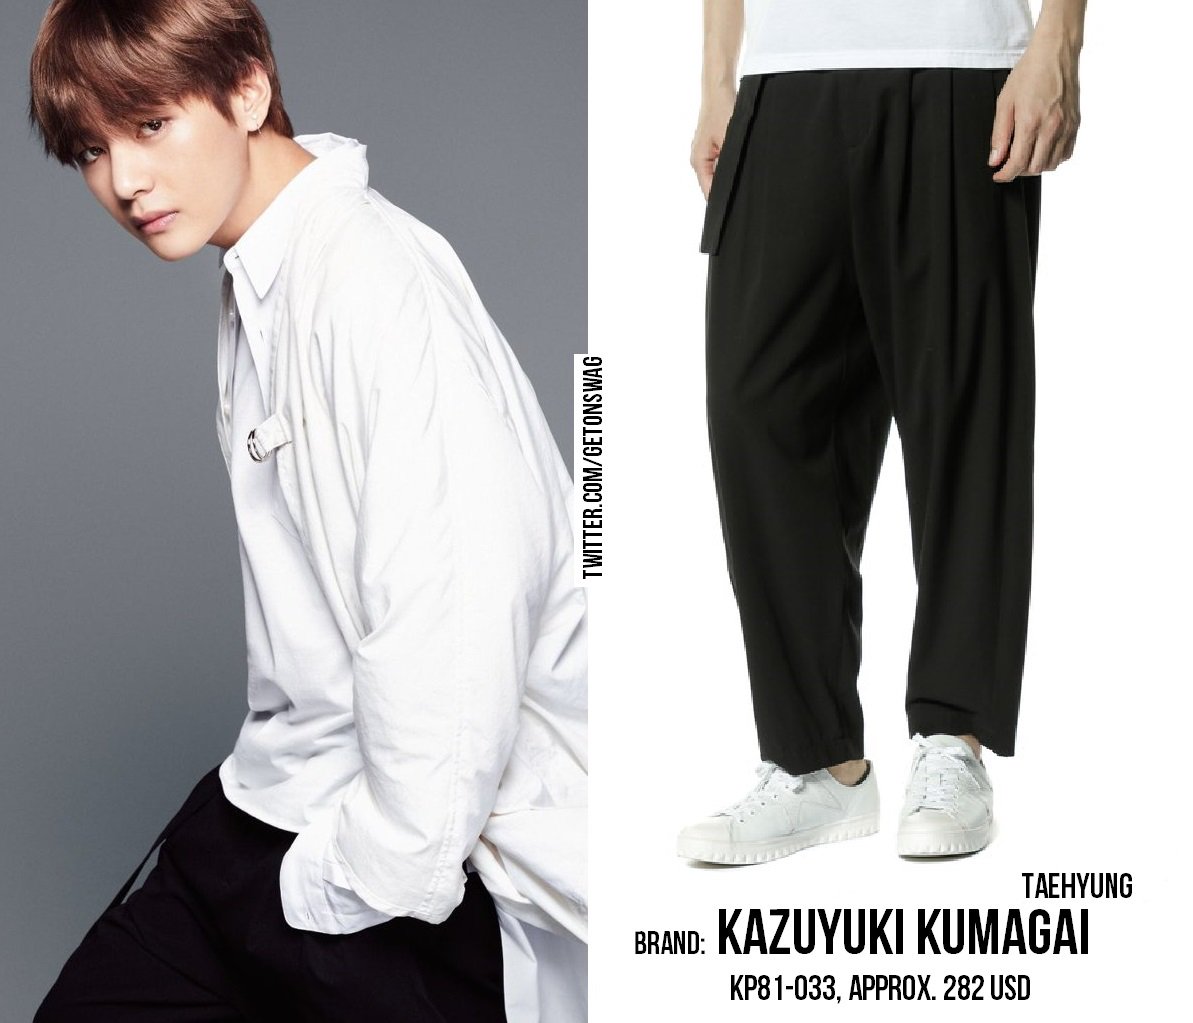 Beyond The Style ✼ Alex ✼ on X: requested #Taehyung #V #BTS brand: LOUIS  VUITTON price (according to GQ Japan): pajama pants 1630 usd, shirt 2224  usd  / X